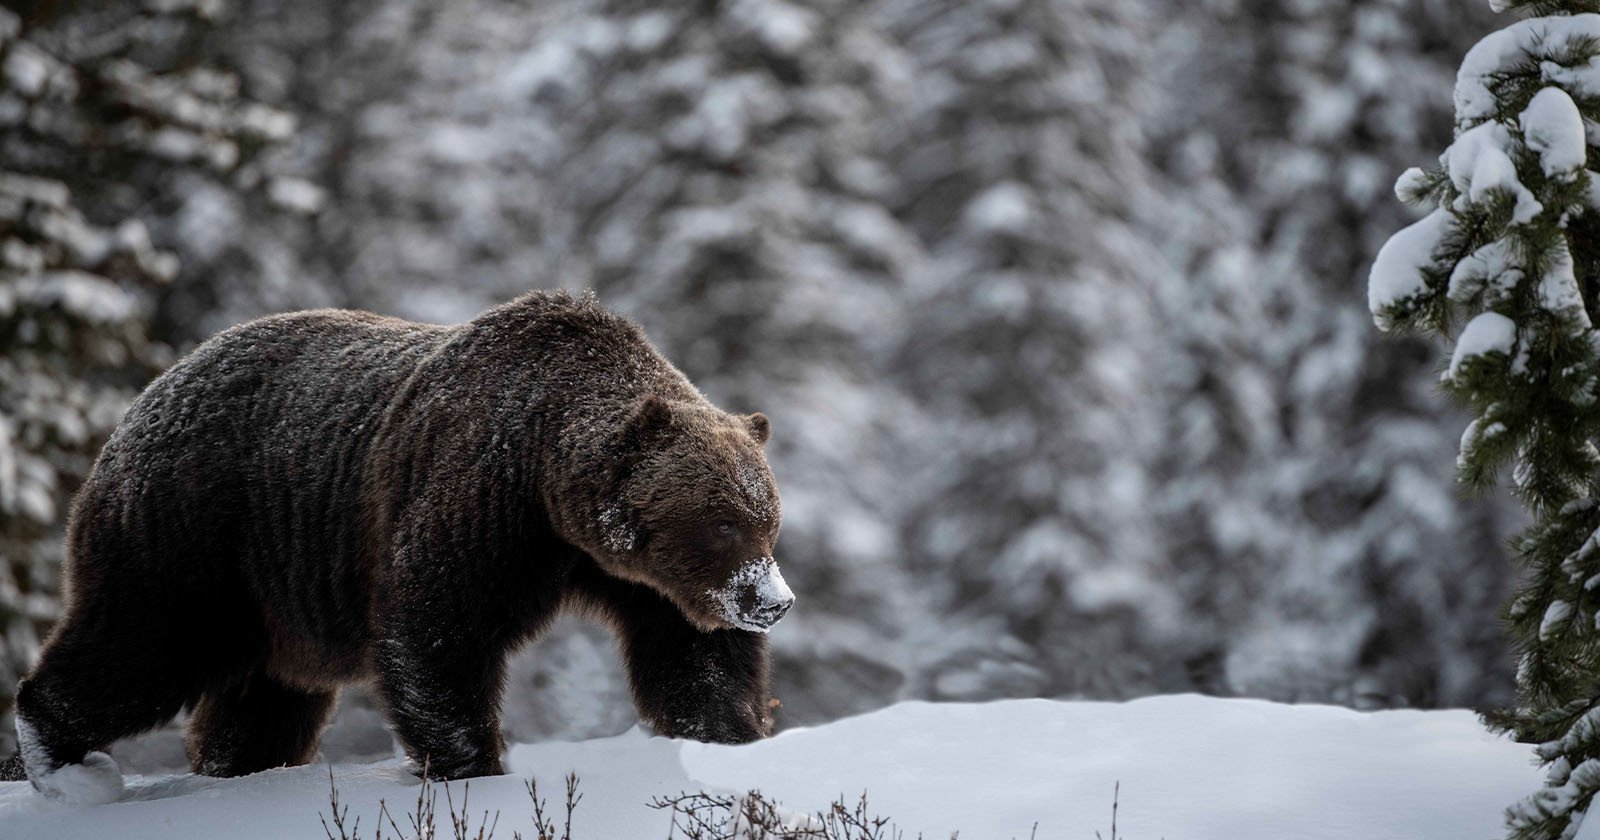  photographer encounter huge grizzly bear known 